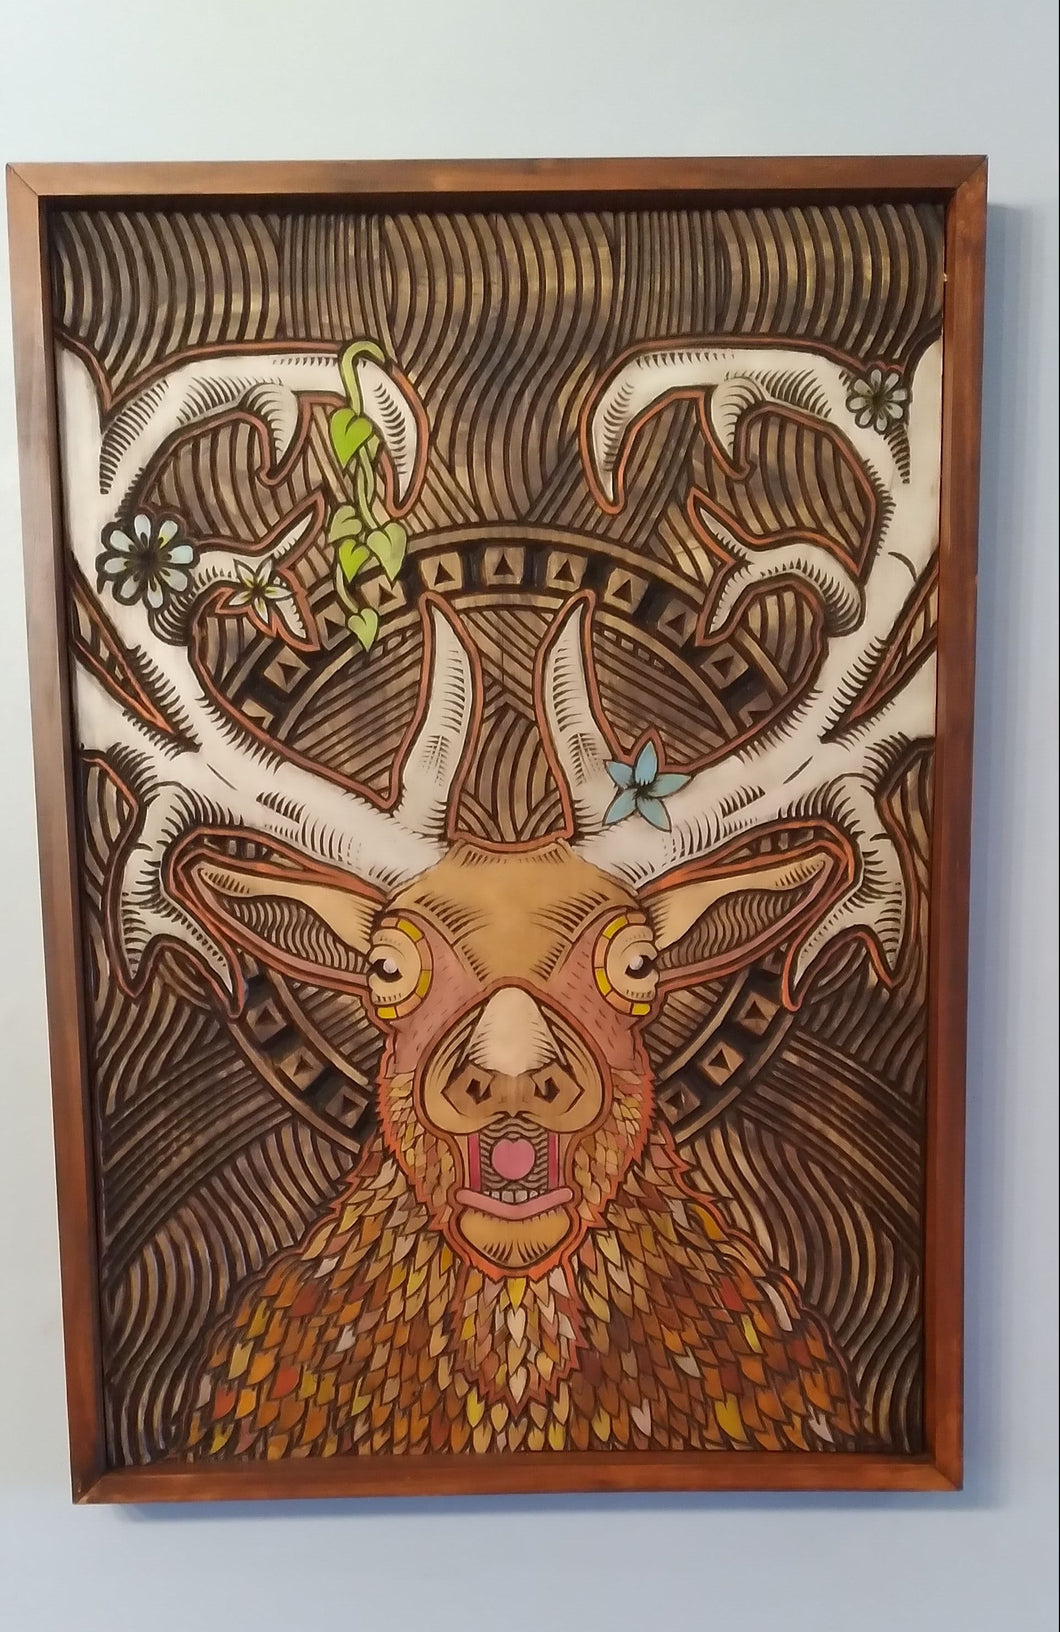 Carved Elk on Pine Wood - Unique Hanging Art Piece 24 x 32 inches